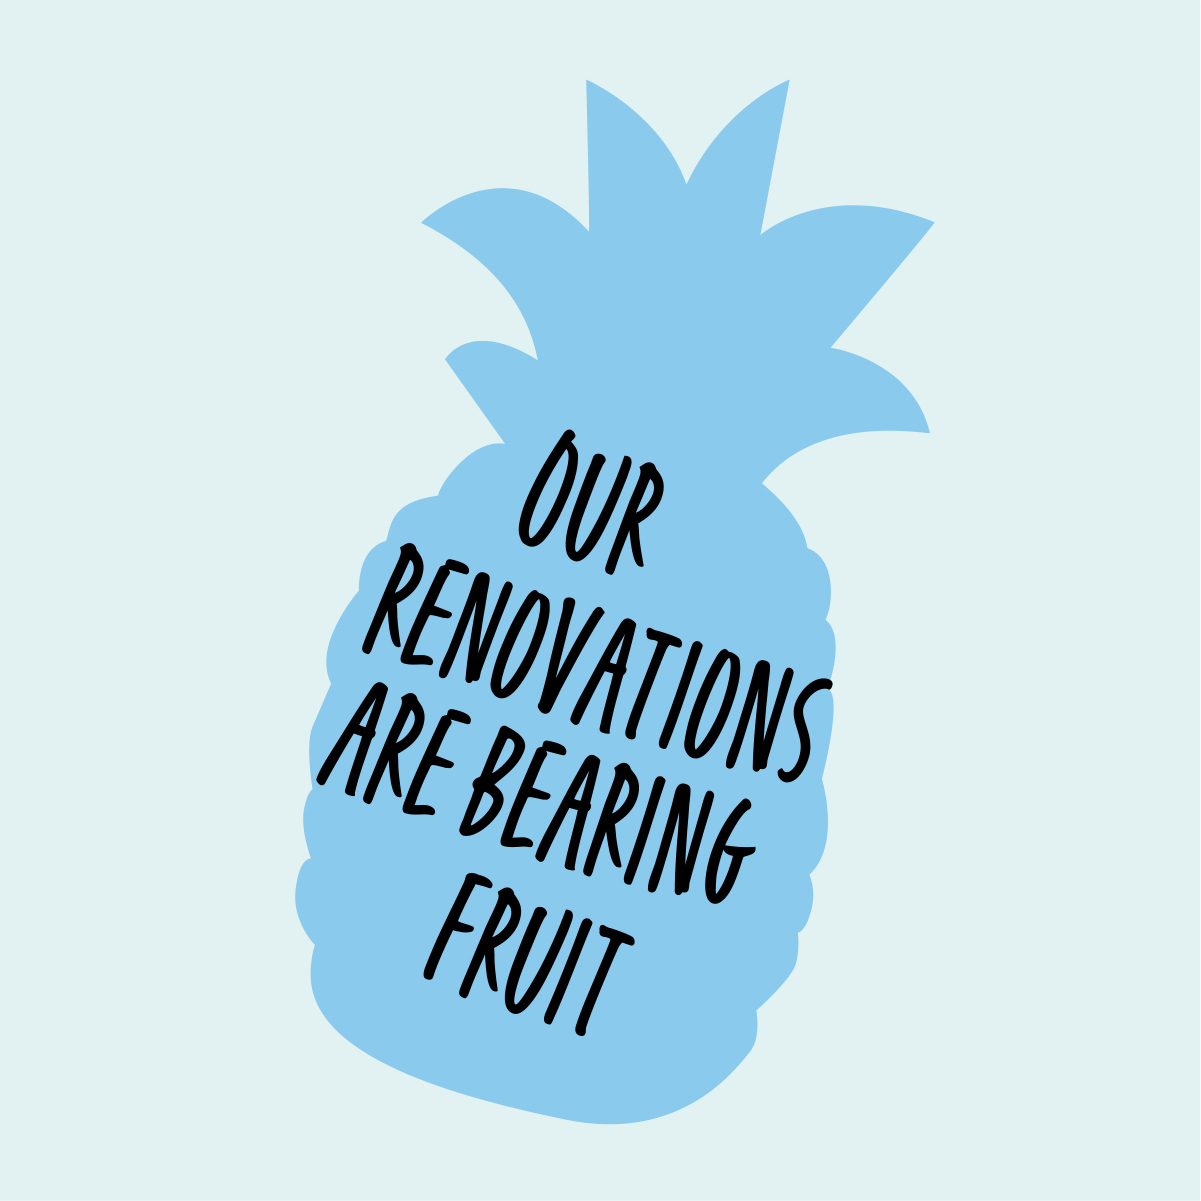 Our renovations are bearing fruit